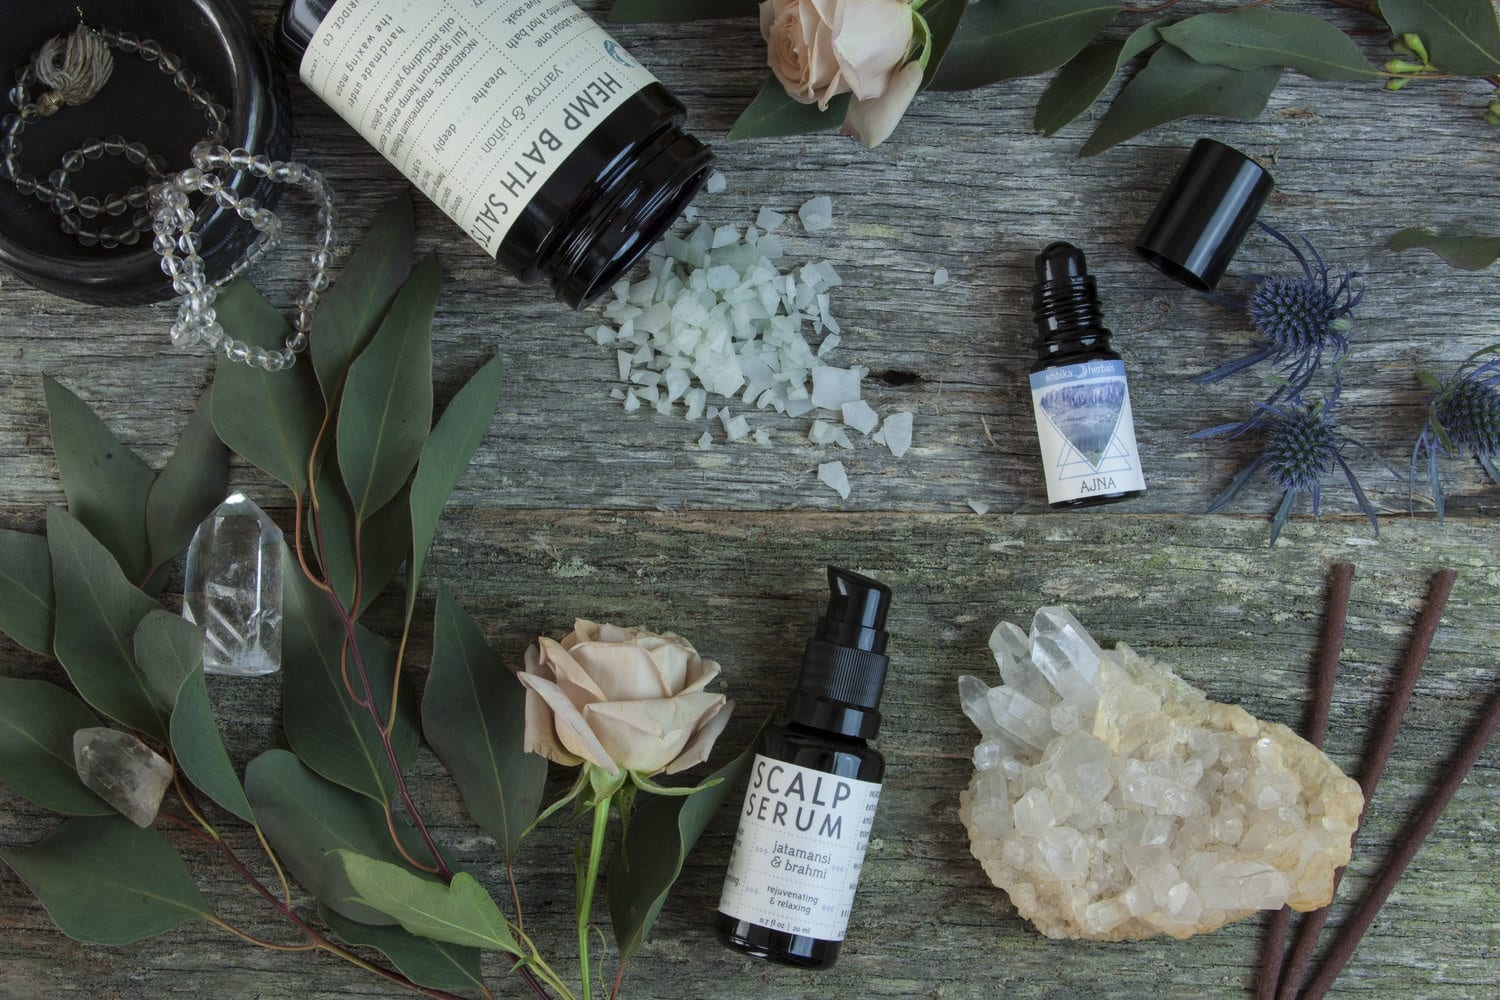 Serum and salts from Ambika Herbal Apothecary